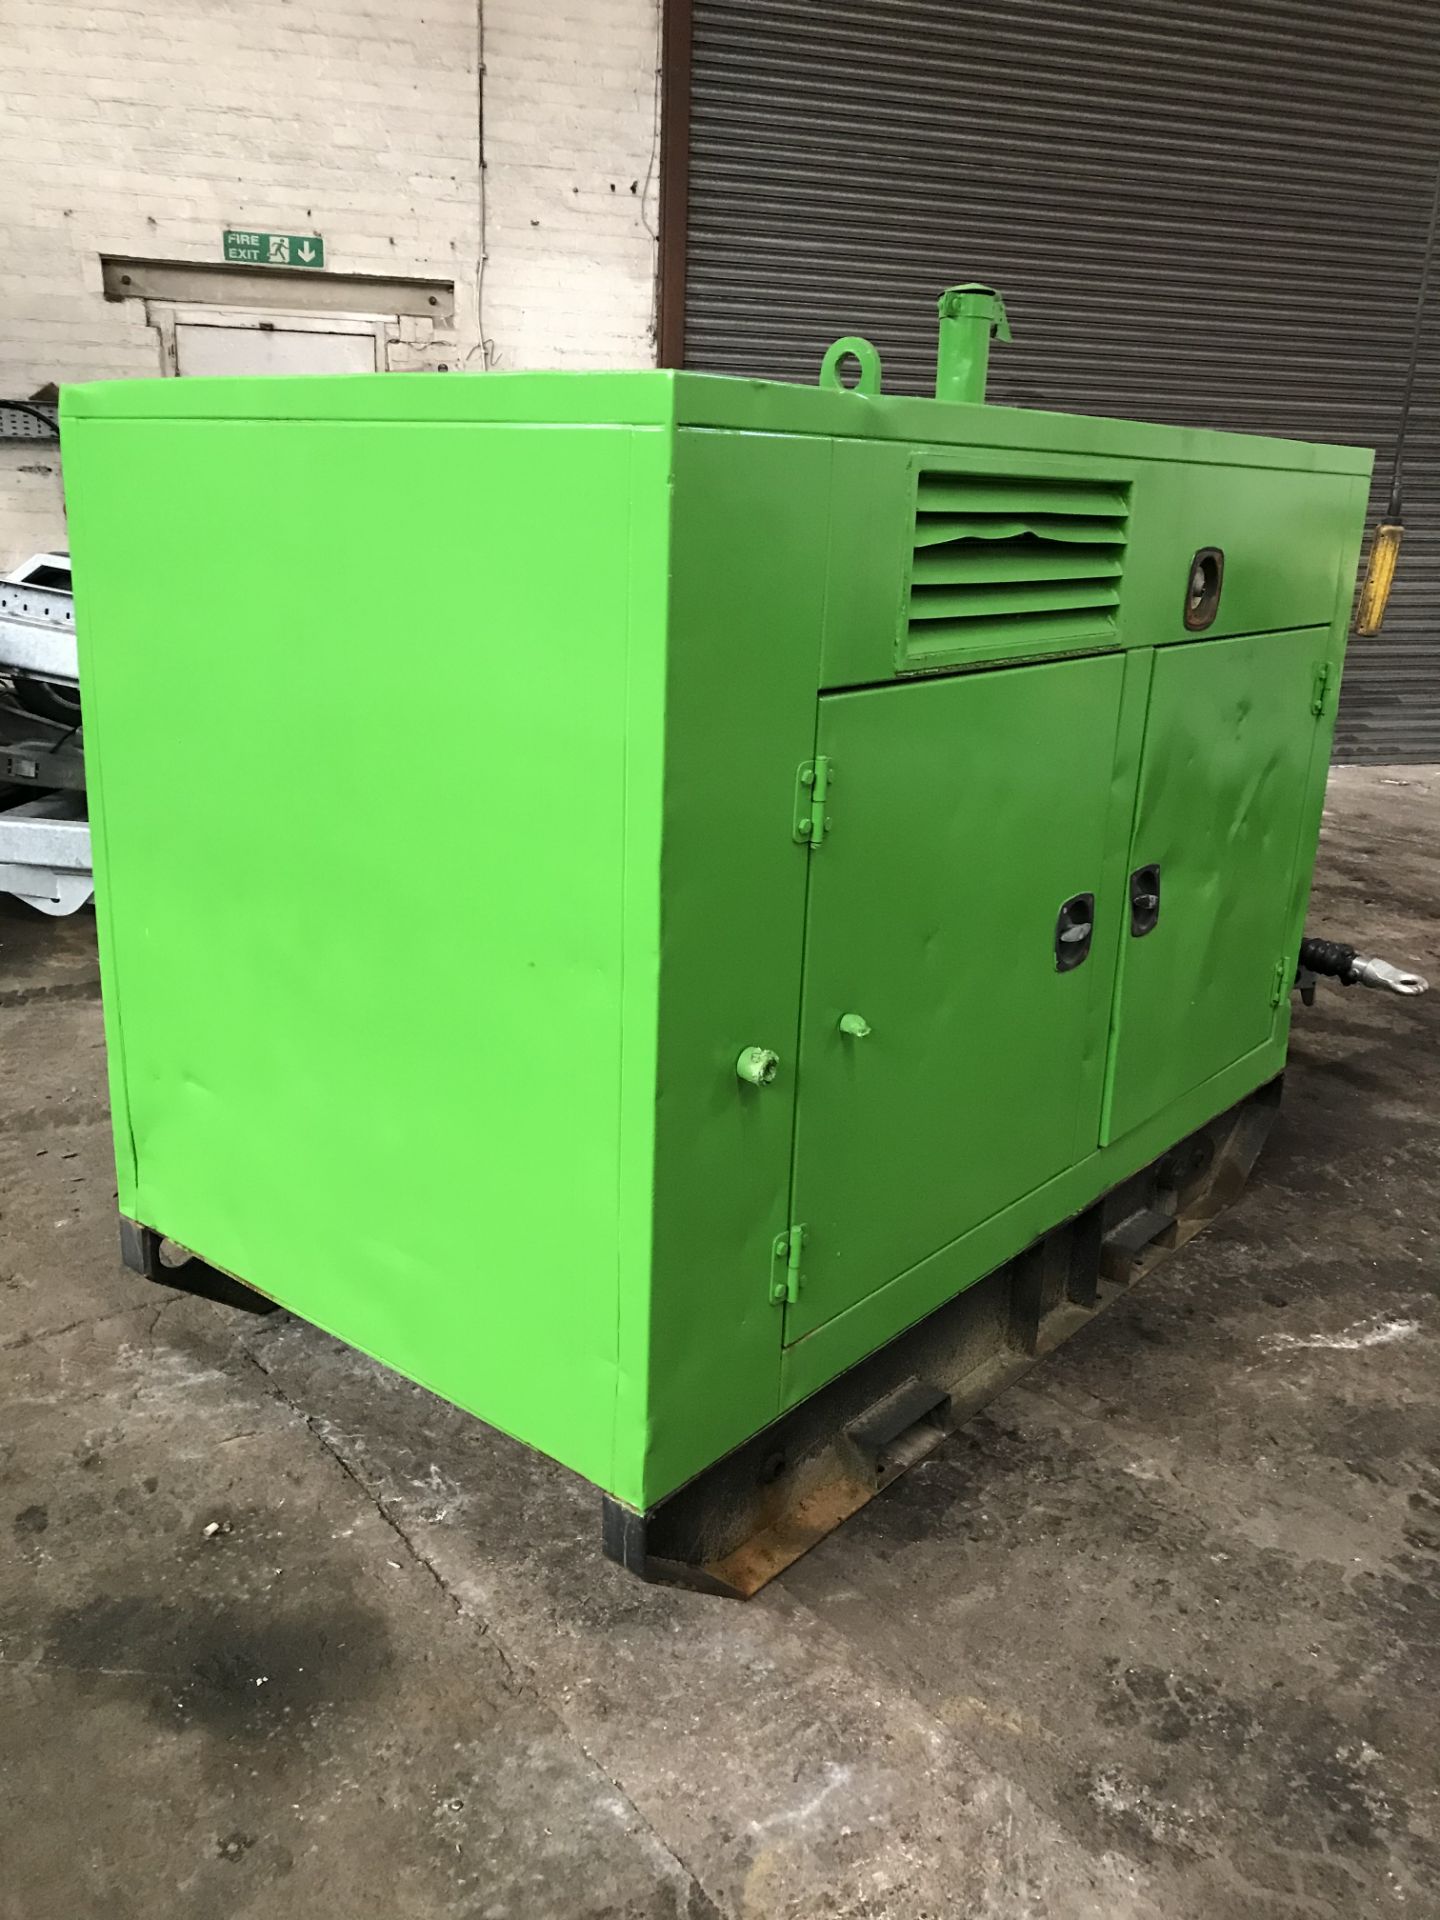 Selwood S150 6"" Solids Handling Pump Silent Cabinet | Ref: A166/2 - Image 3 of 12